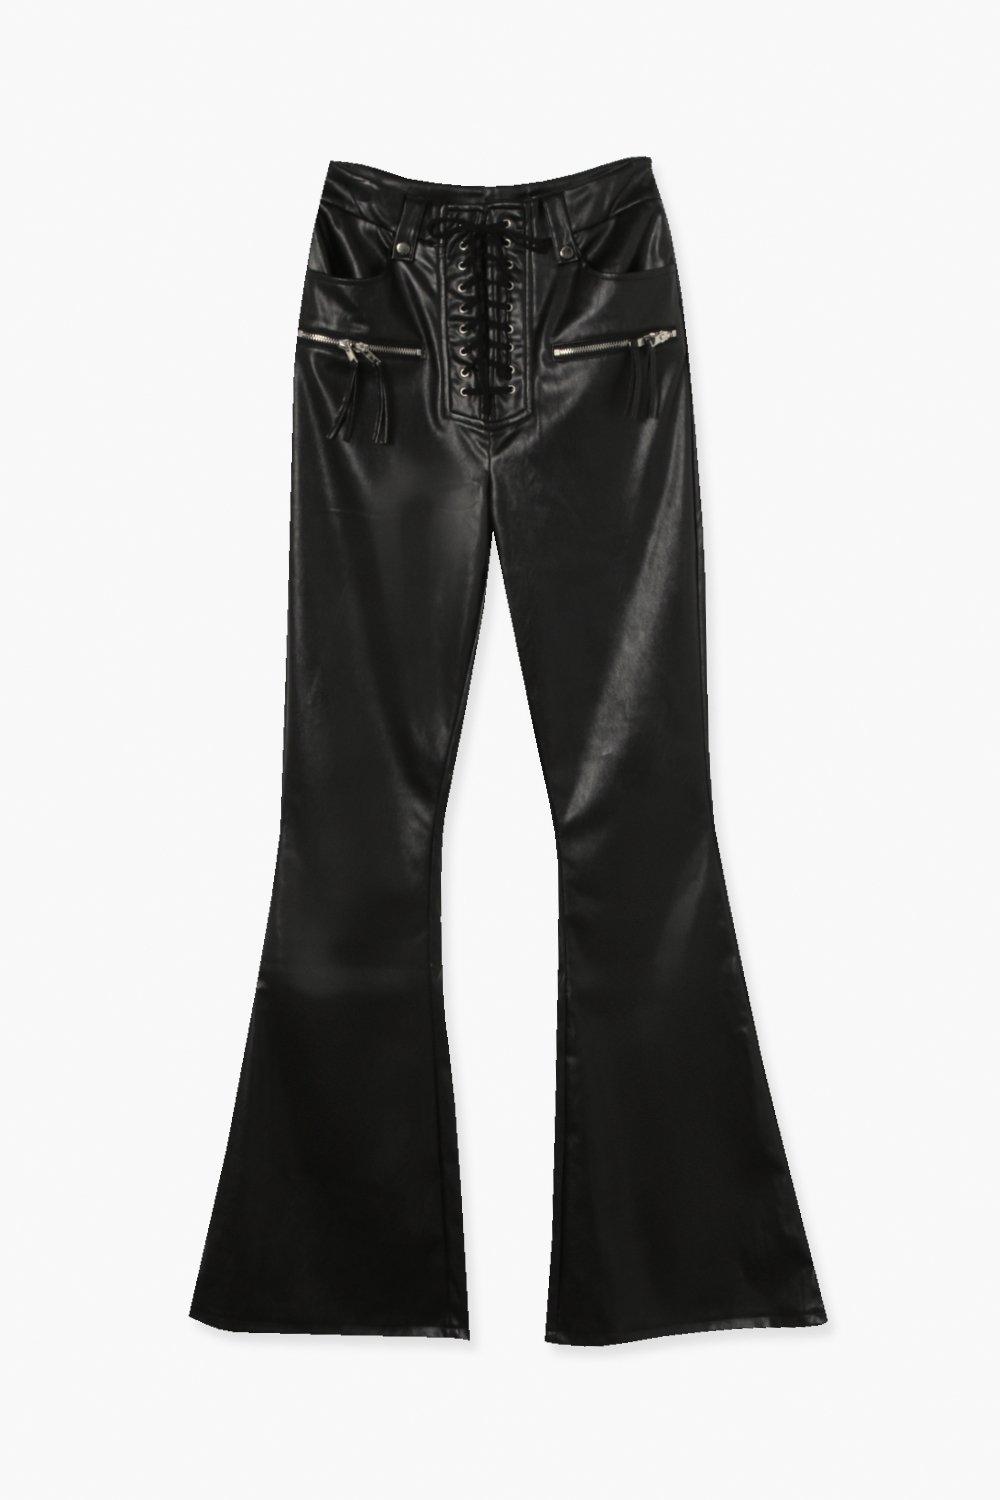 Biker Lace Up Faux Leather Flared Pants